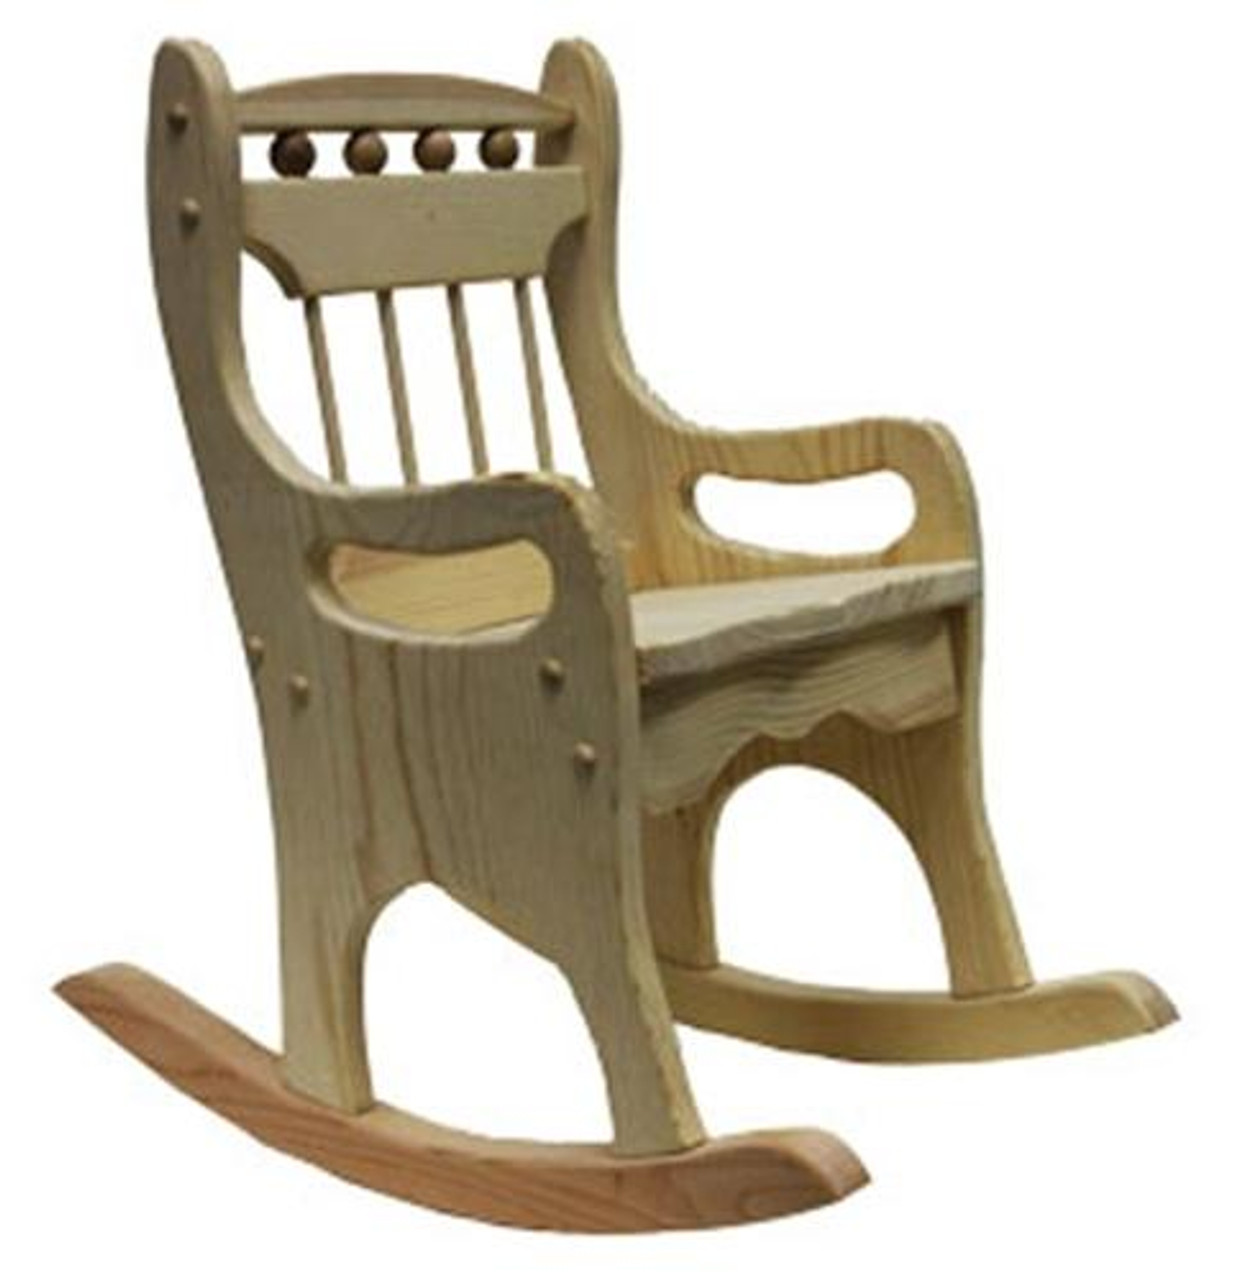 A Cool DIY Garden Rocking Chair - Your Projects@OBN